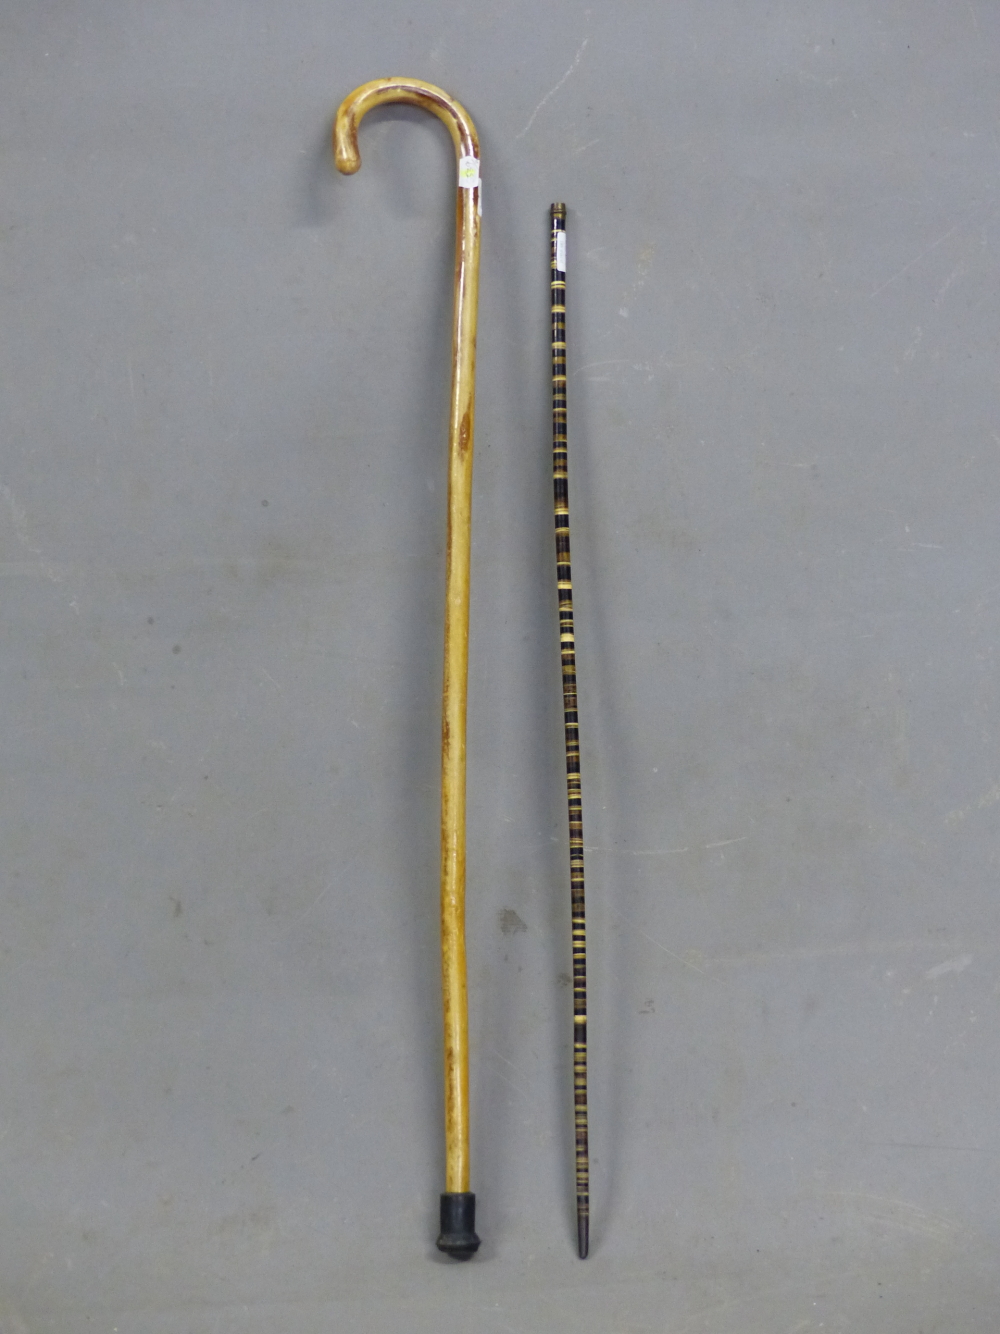 A HORN WALKING STICK OF AMBER HUE TOGETHER WITH A WALKING CANE FORMED OF HORN IN BANDS OF COLOURS